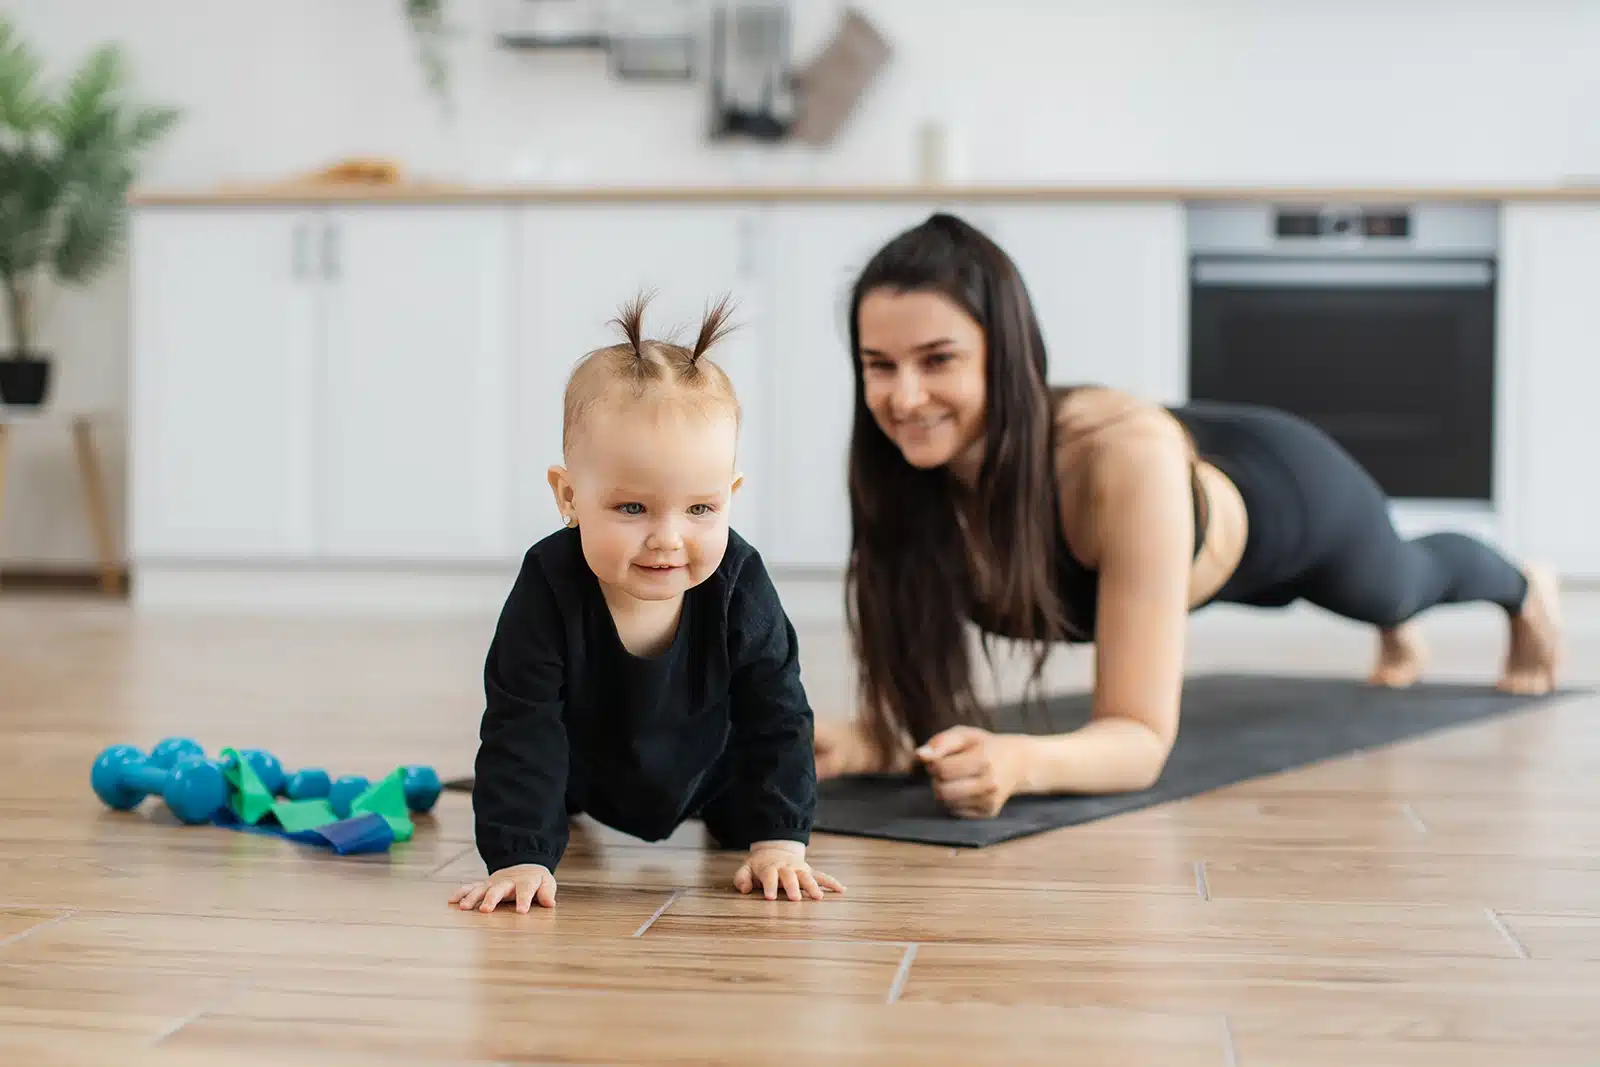 A young child and an adult engage in playful exercise on a durable wood-look kitchen floor in a Tacoma home, reflecting a family-friendly design.